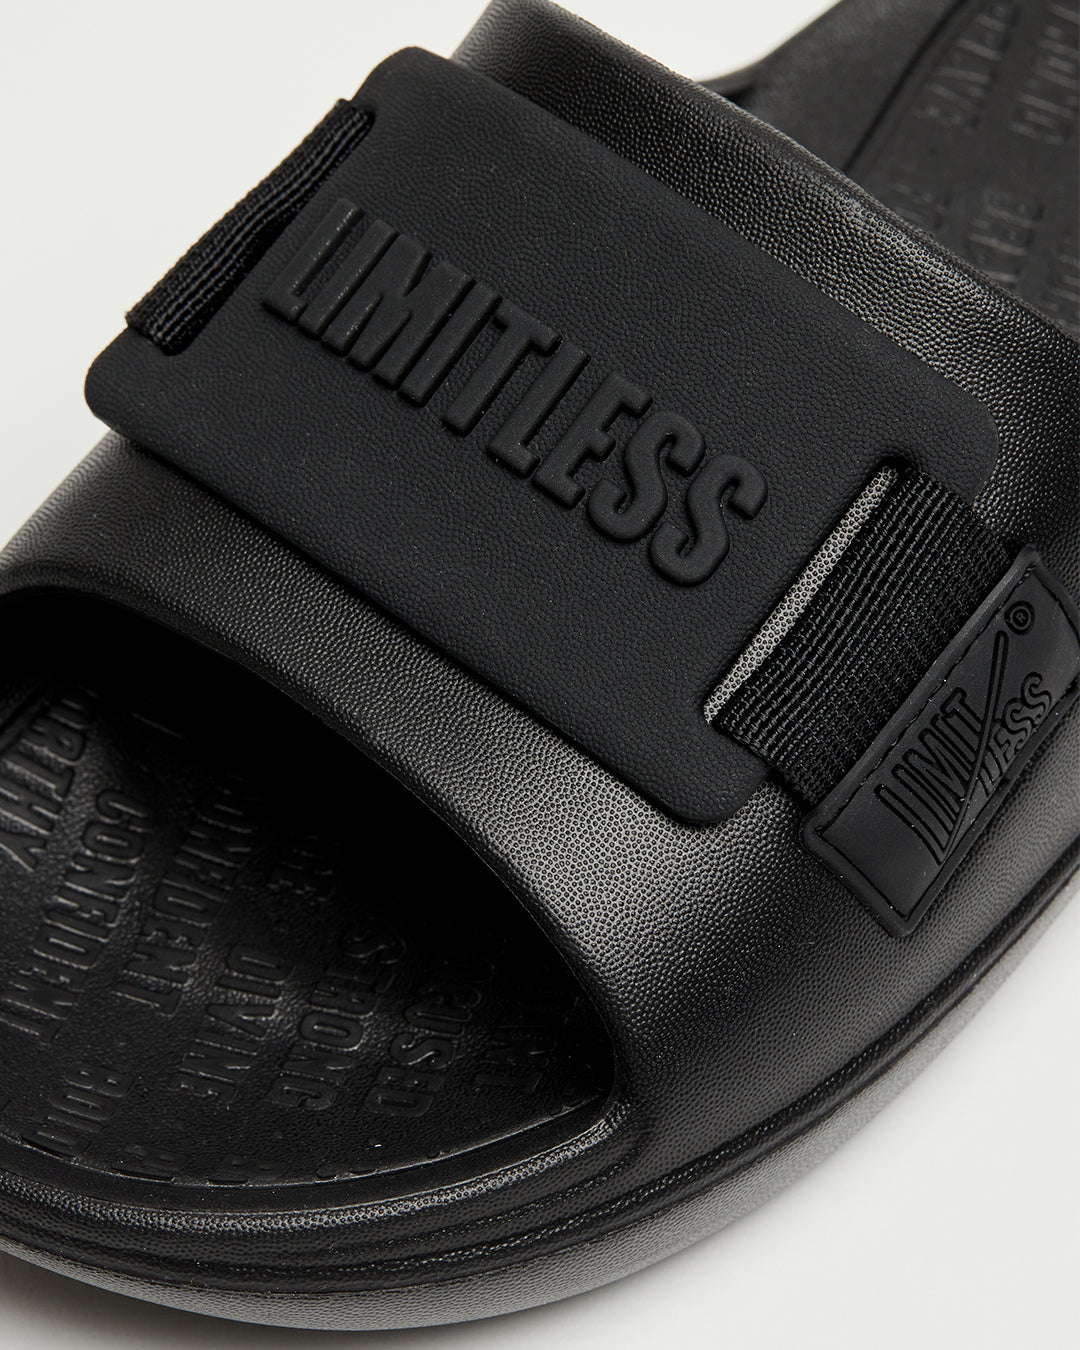 LIMITLESS SLIDES™ WITH ESSENTIAL TIBAH™ QUAD - RIVERDALE HIGH SCHOOL EDITION